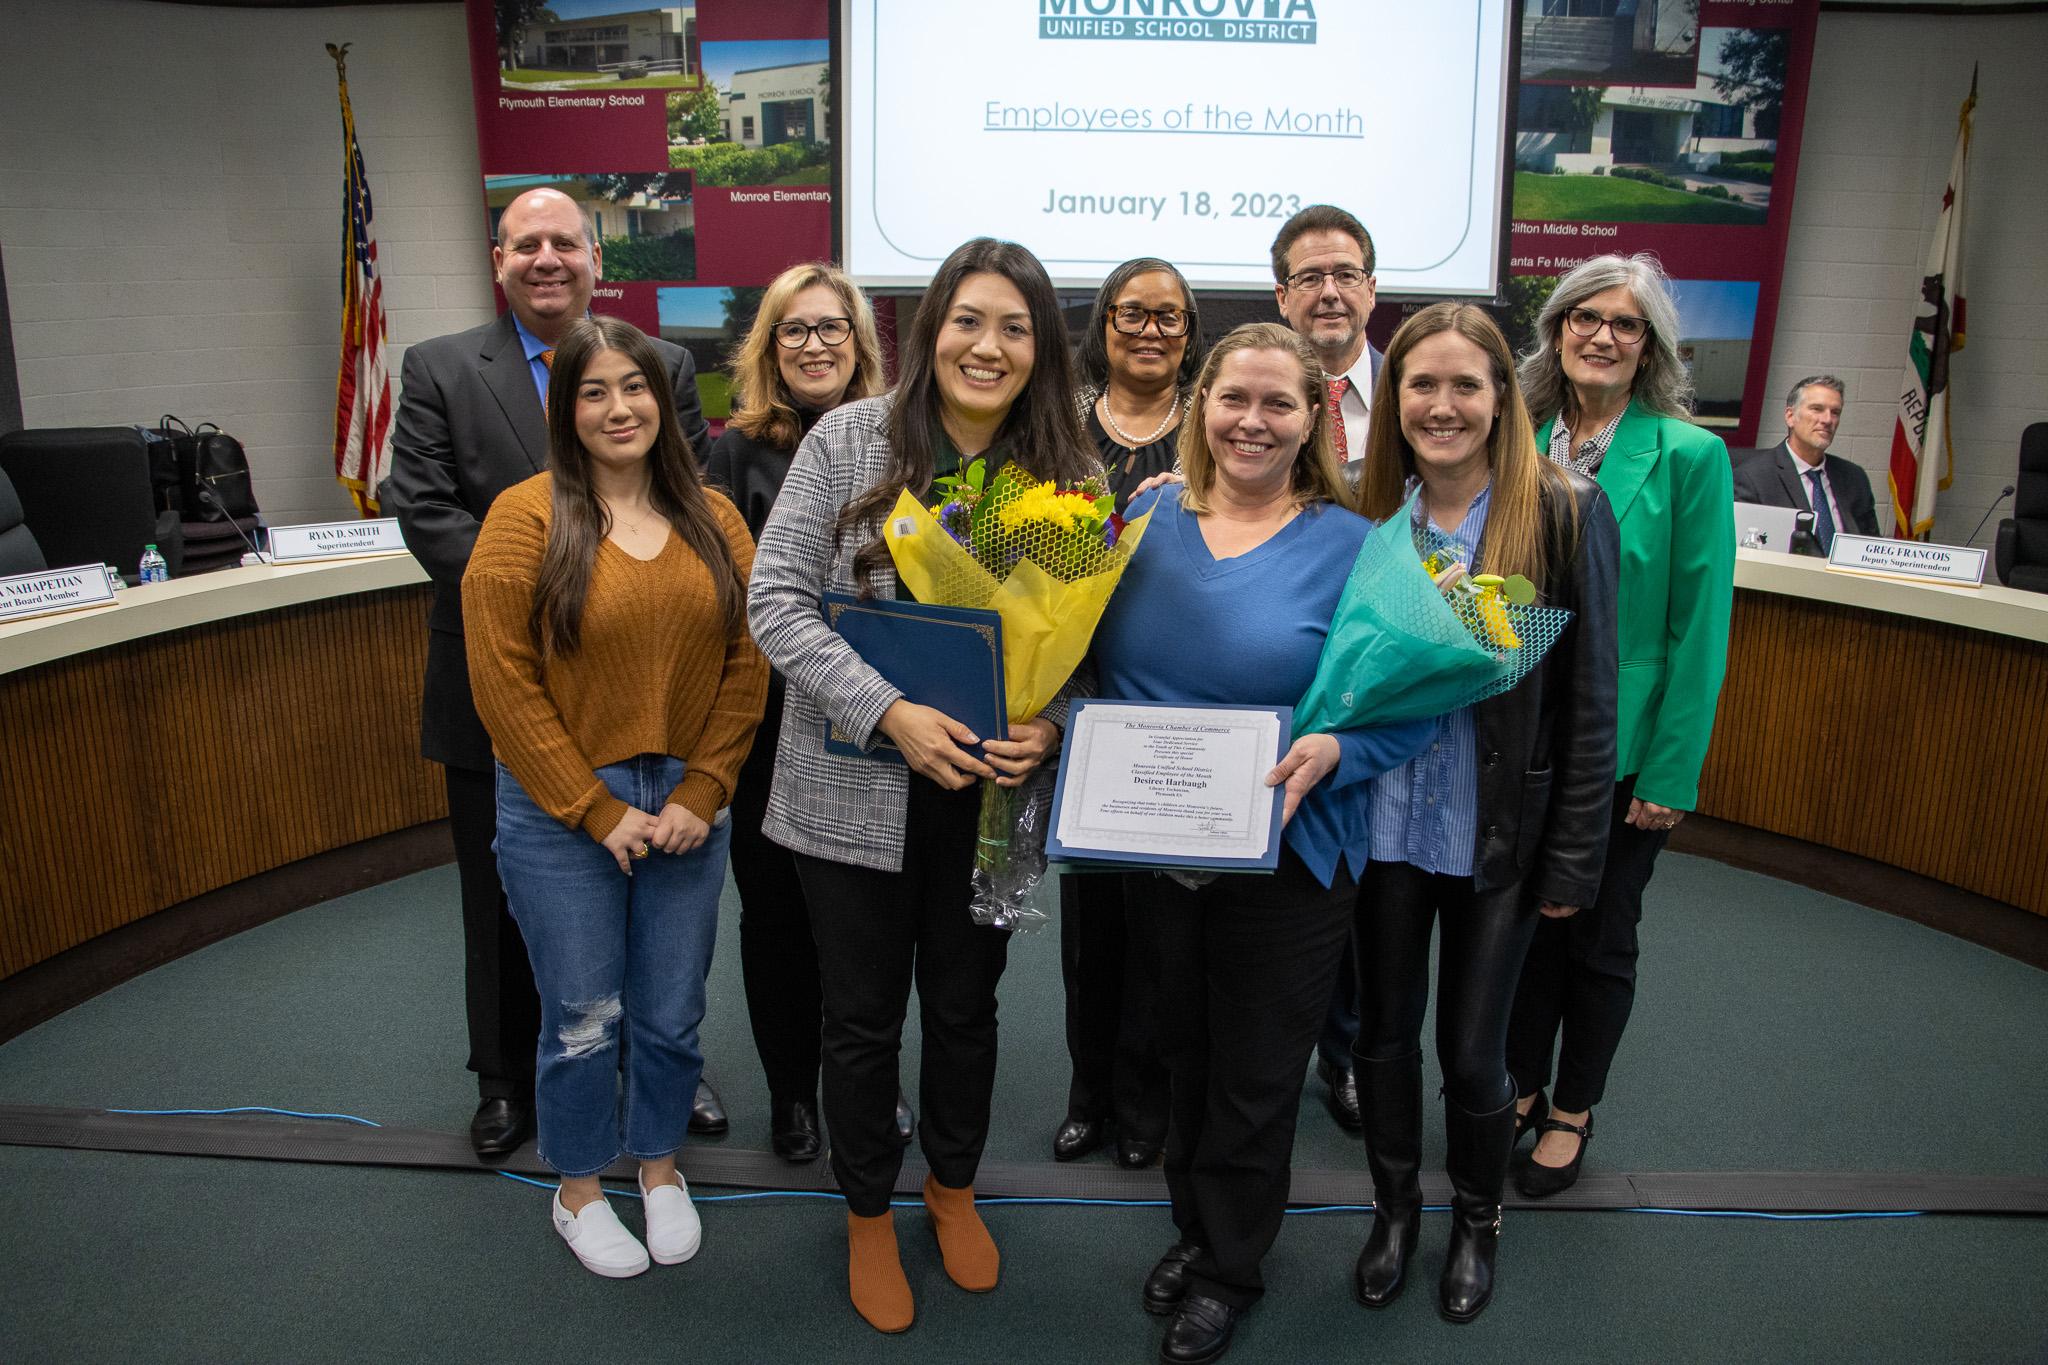 The Board of Education & the Monrovia Chamber of Commerce congratulated Desiree Harbaugh and Mitzi Avila on being recipients of Monrovia Unified School District's "Employee of the Month" for January.